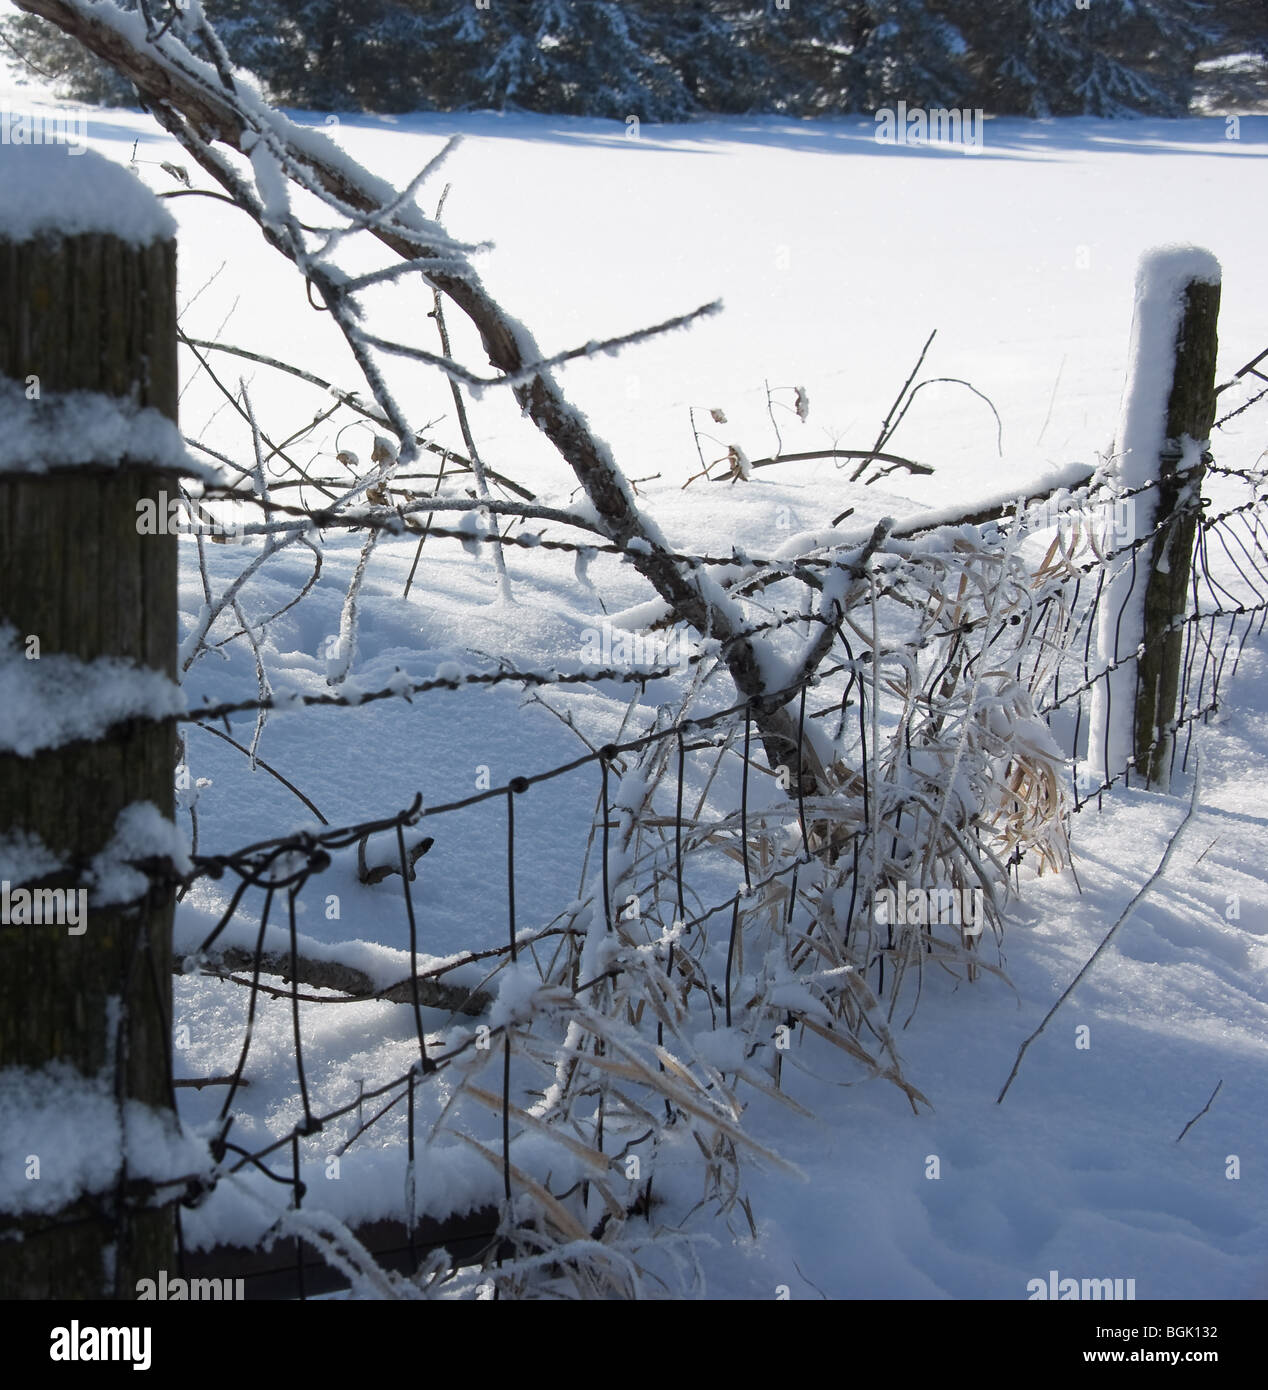 Snow, ice and frost on a fence overgrown with vines and weeds framed by two fence posts Stock Photo